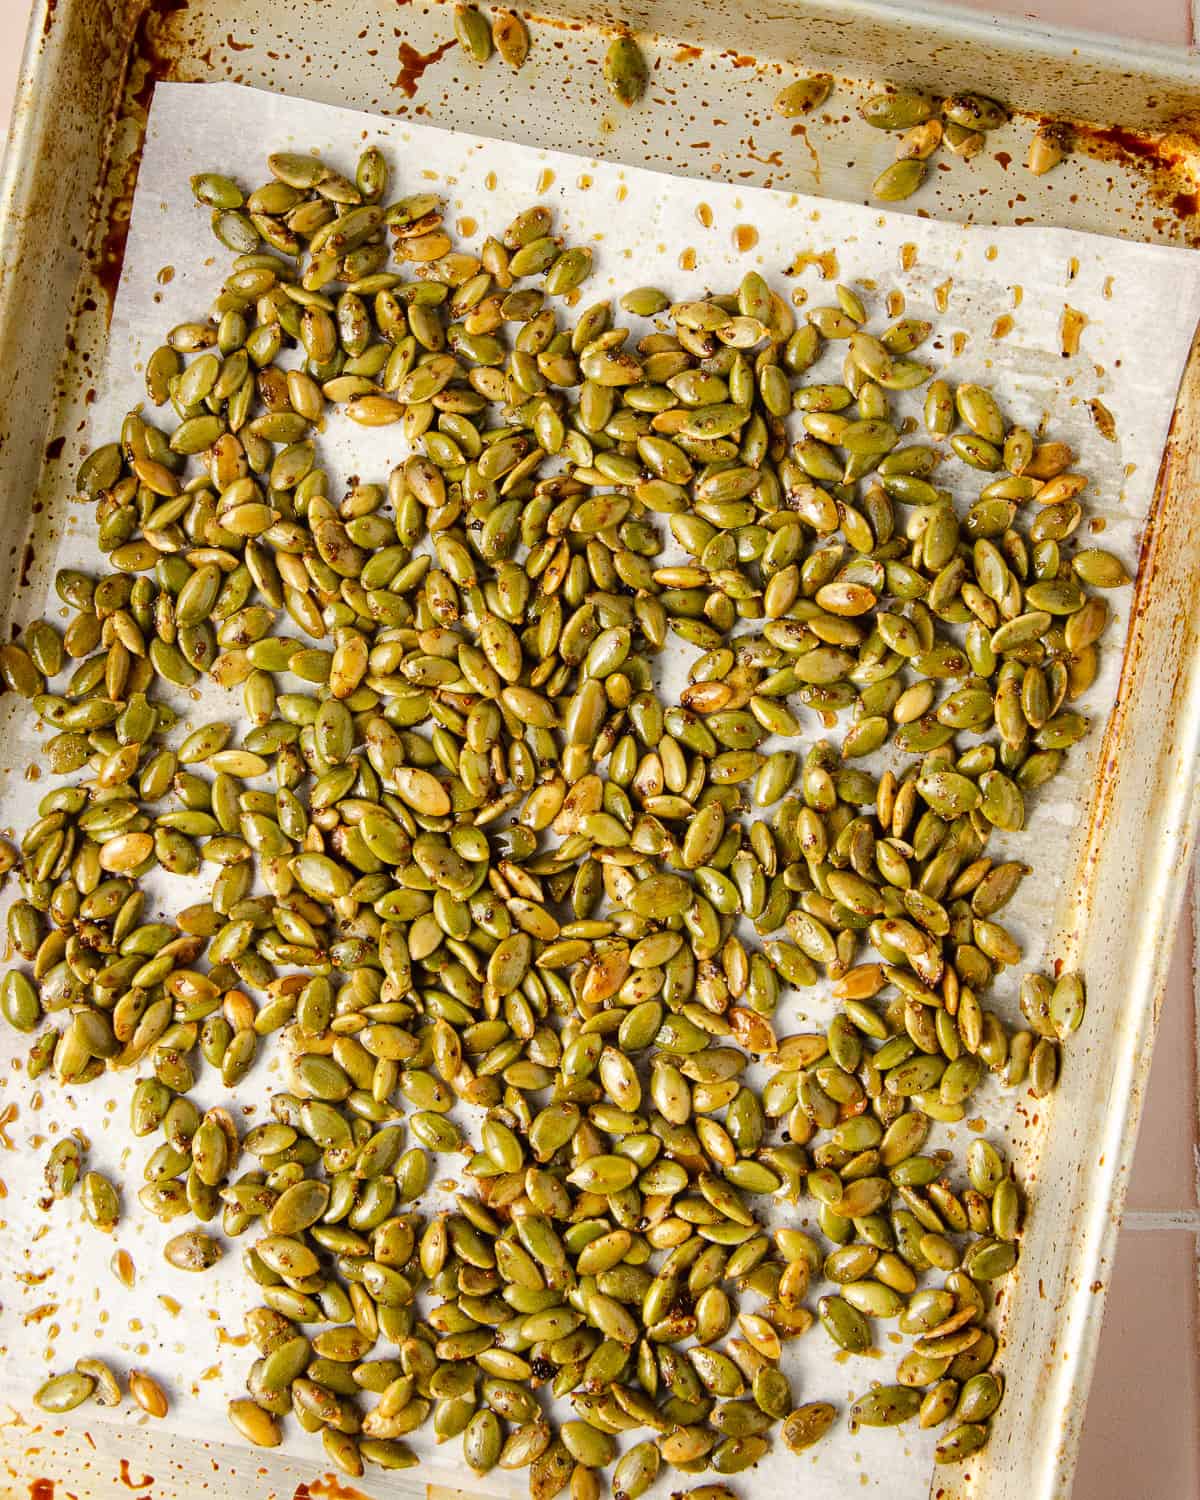 Roasted pepitas on a baking sheet lined with parchment paper.